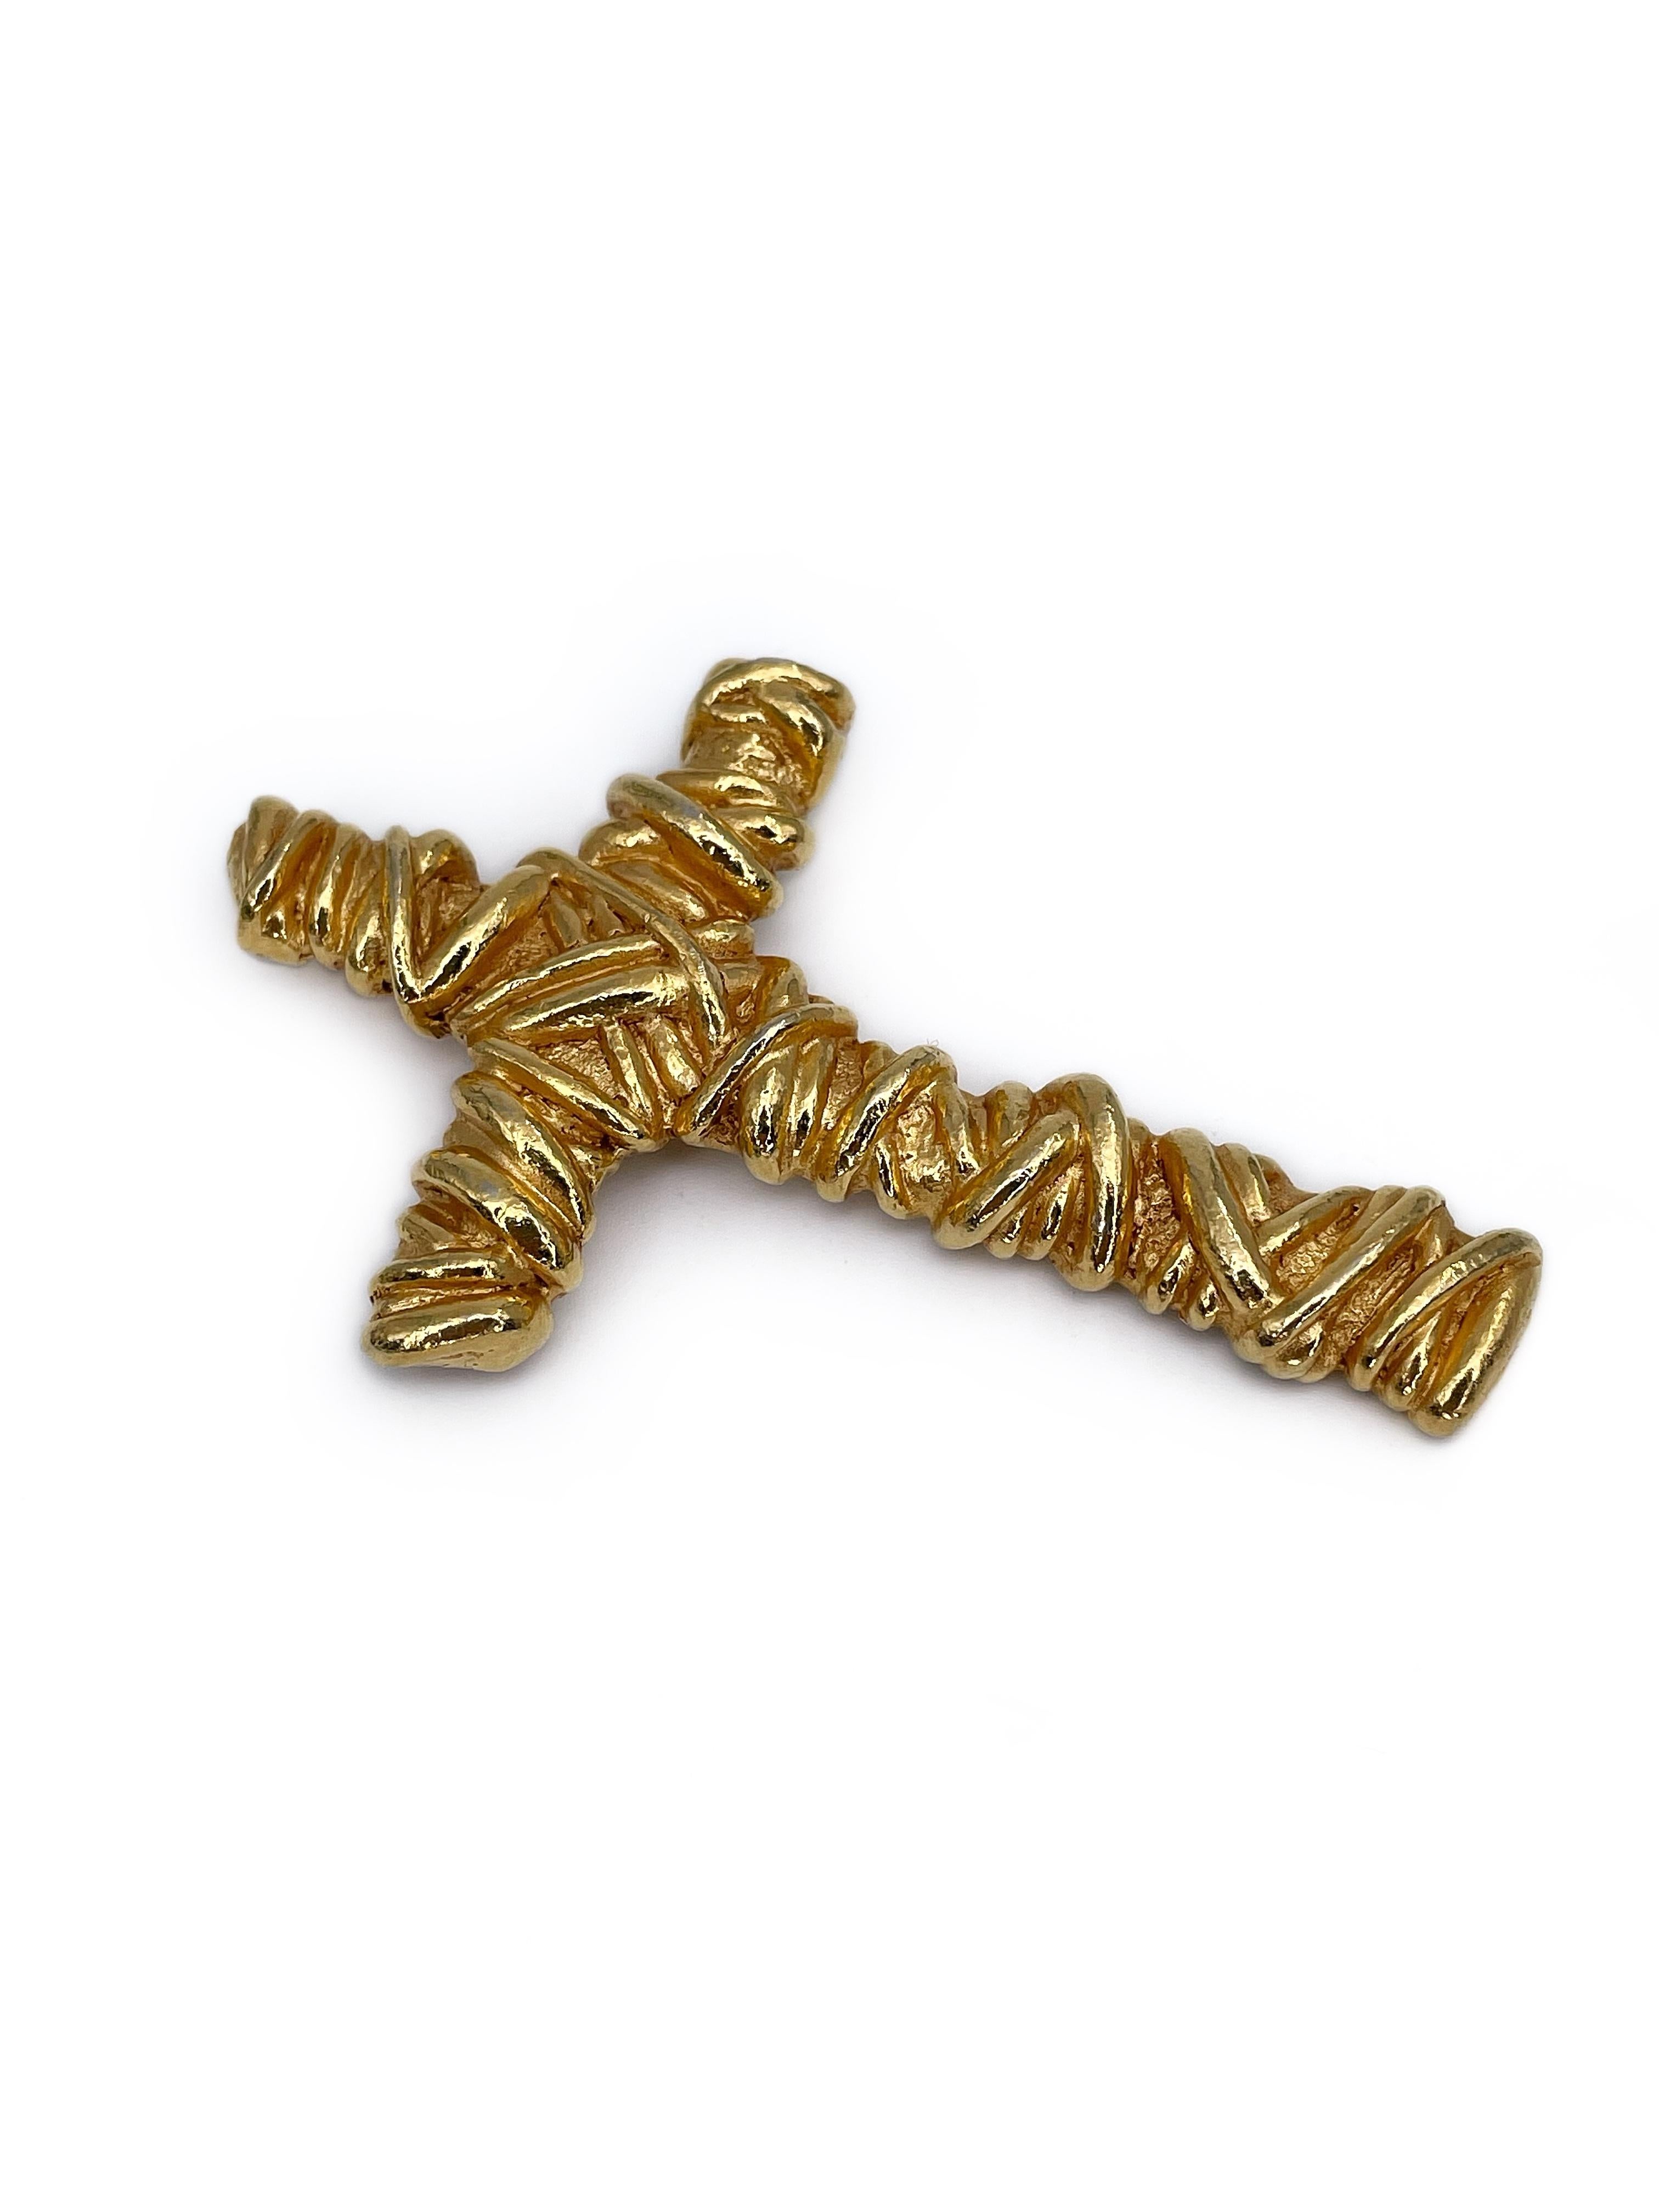 This is a beautiful textured gold tone cross pin brooch designed by Christian Lacroix in 1990’s. The piece is gold plated. 

Signed: “Christian Lacroix - E94 - Made in France”.

Size: 7.5x4.5cm

———

If you have any questions, please feel free to